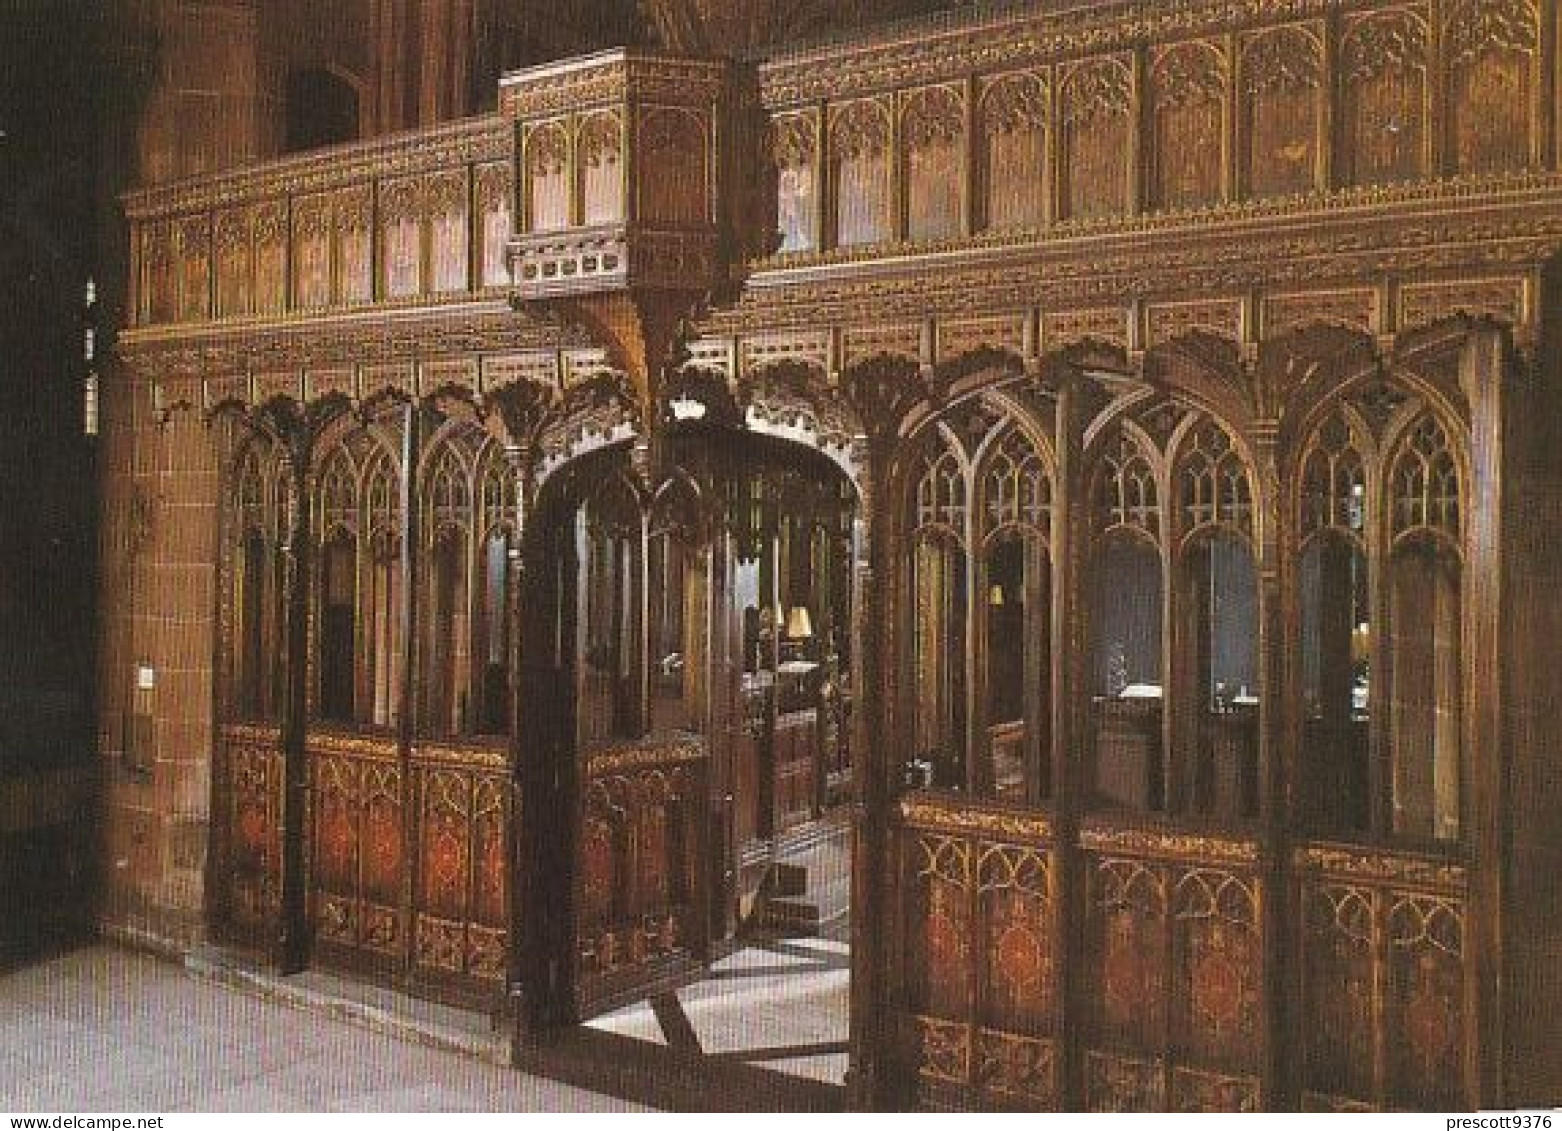 Pulpitum Screen, Manchester Cathedral - Lancashire - Unused Postcard - Lan5 - Manchester